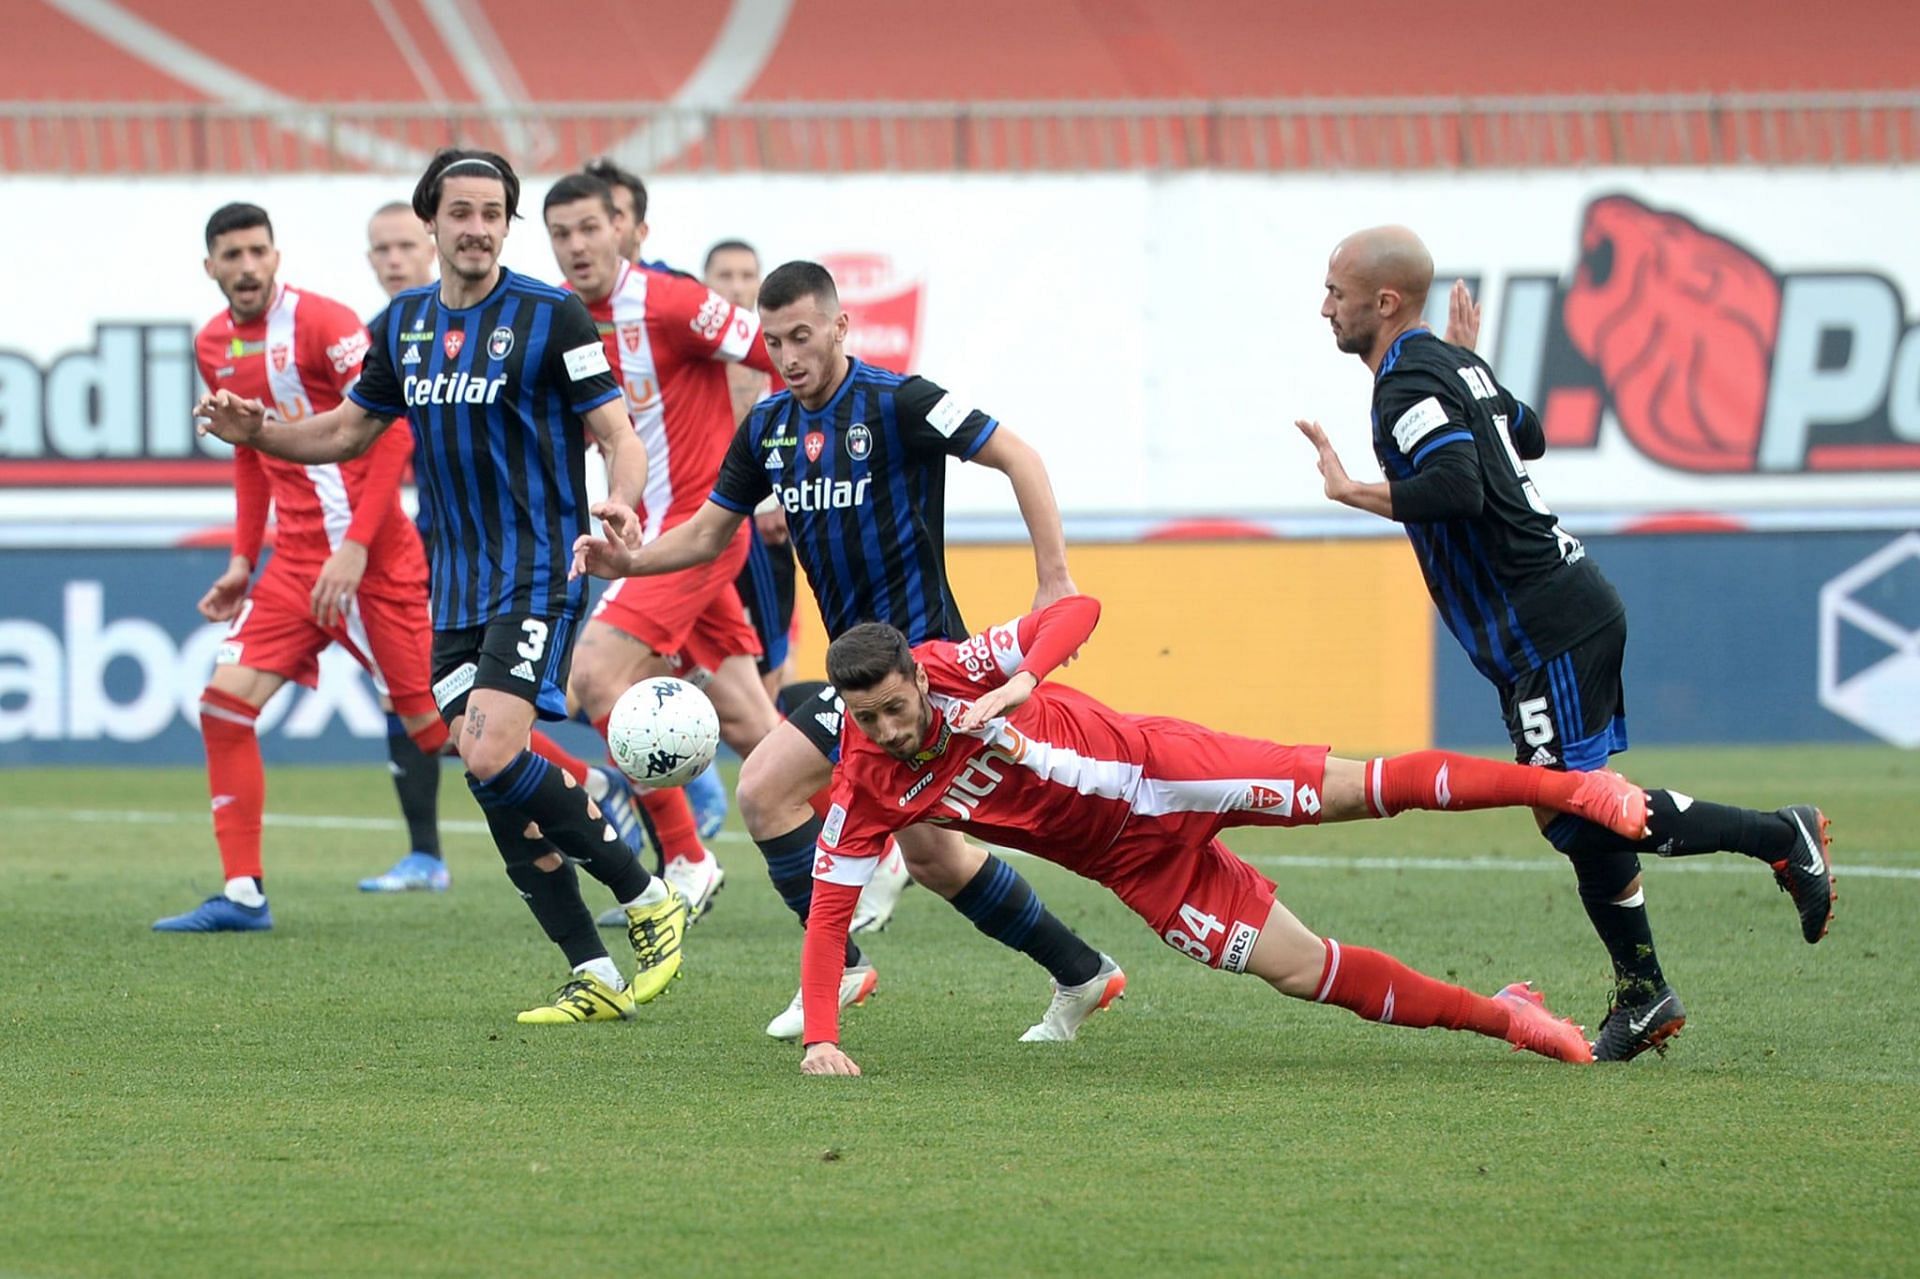 Pisa will have to overturn a one-goal difference in the second leg of the Serie B promotion playoffs